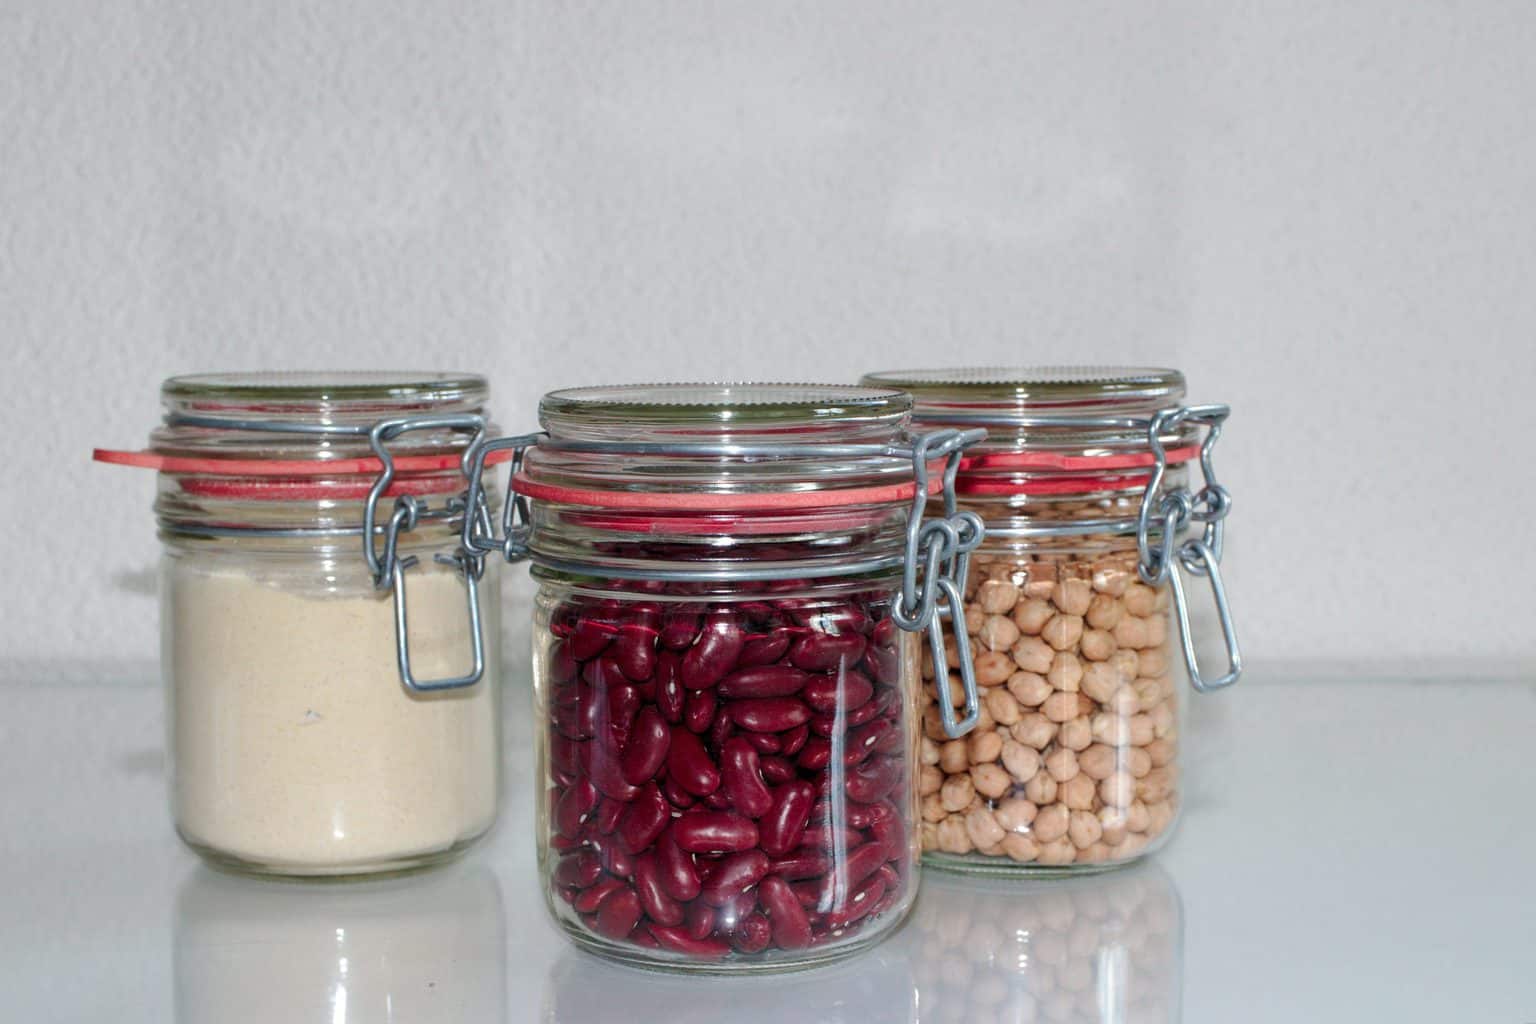 Pantry organization with canning jars